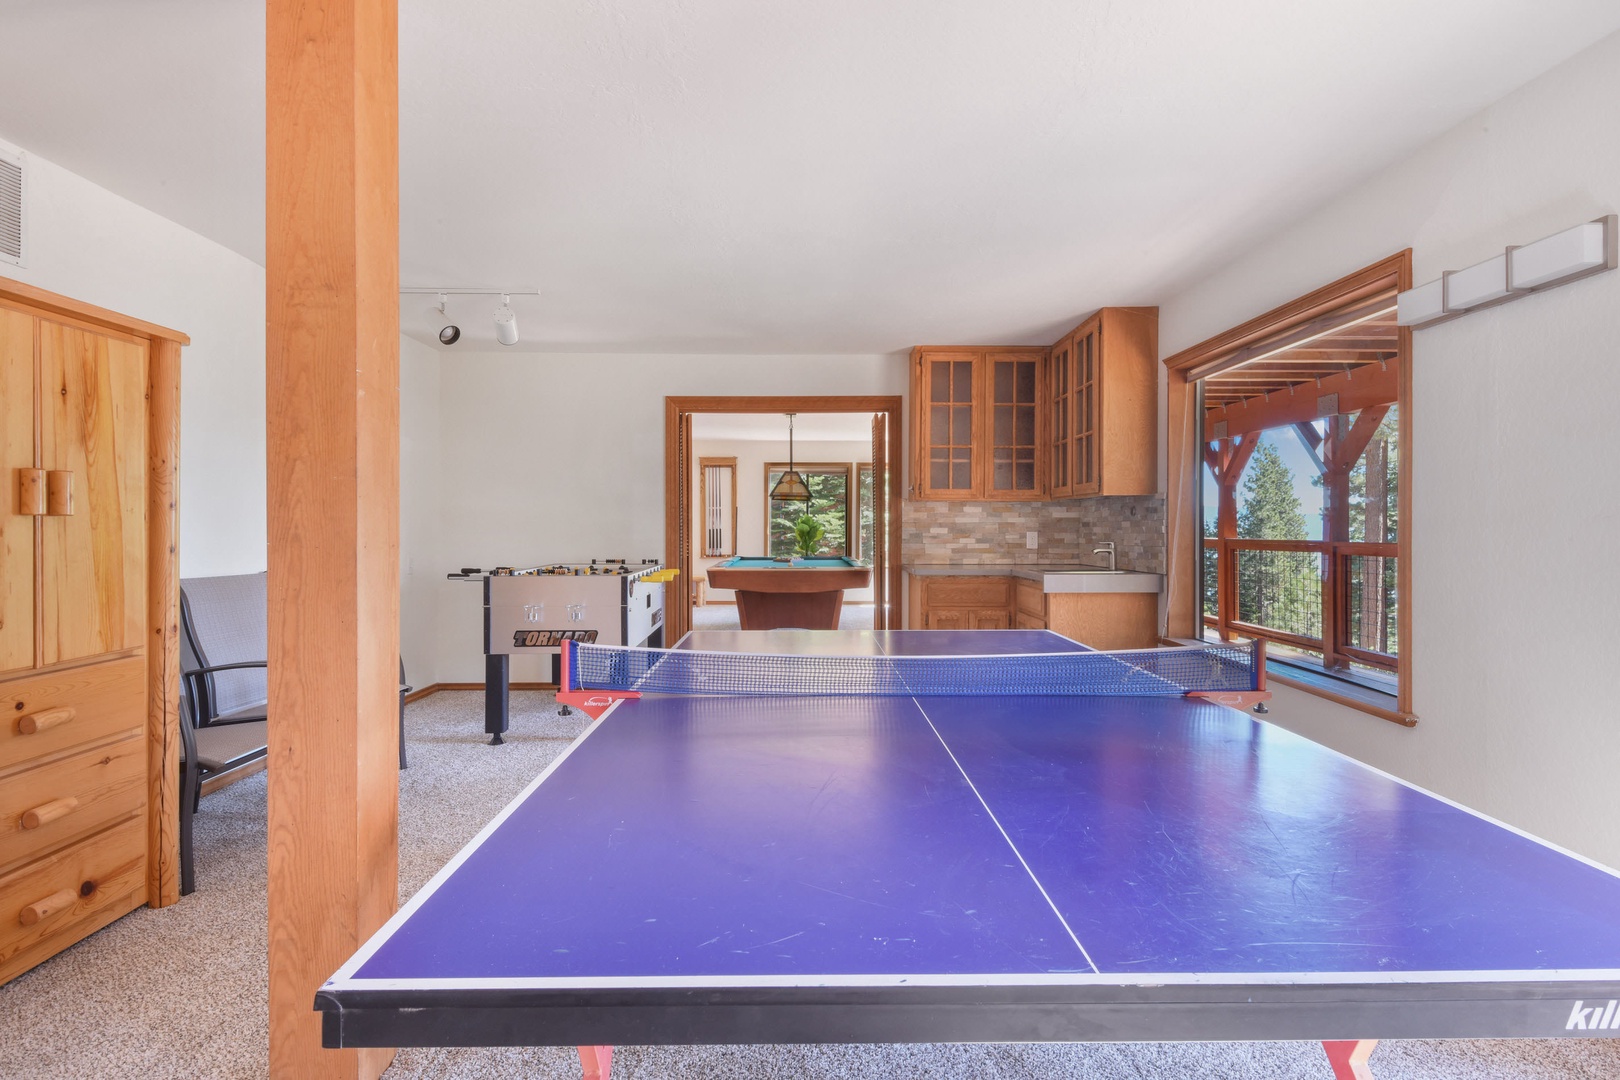 Extended game room w/ ping pong table, foosball table